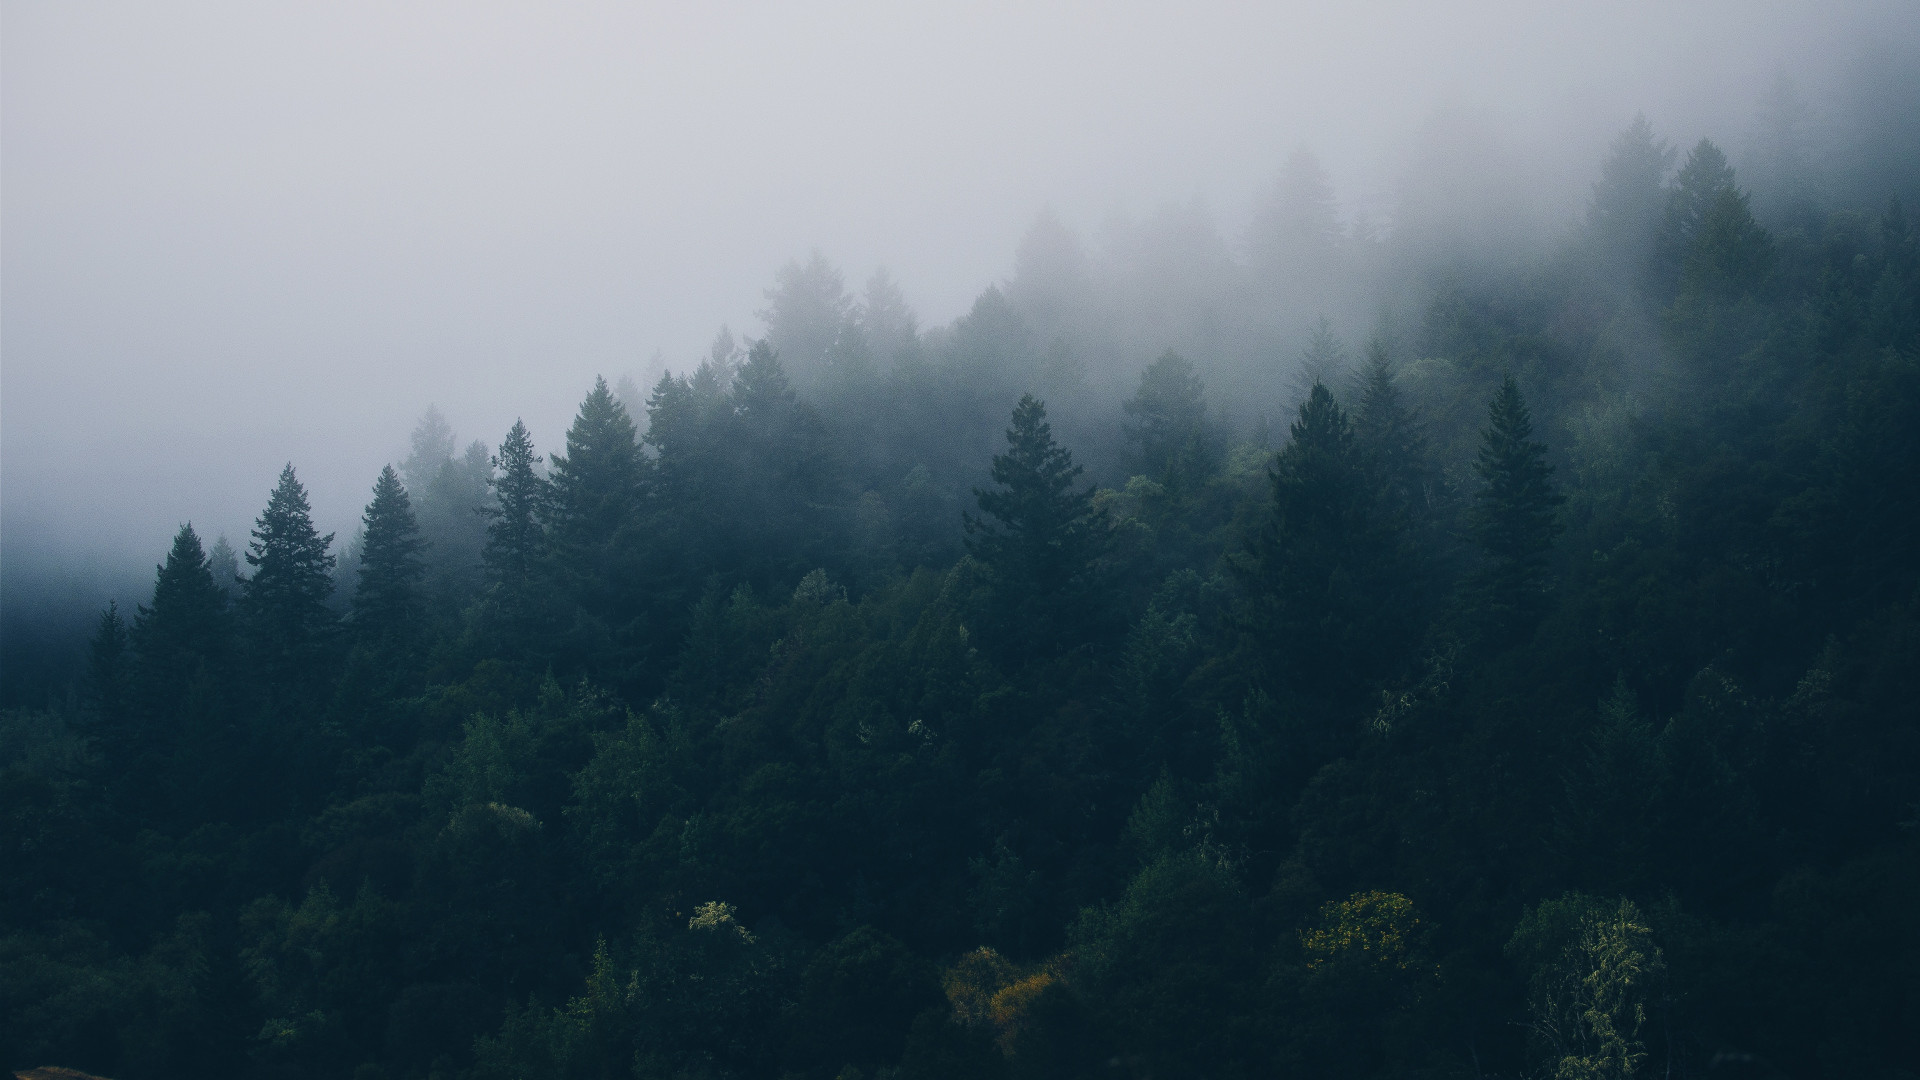 Preview Wallpaper Forest Trees Fog 1920x1080 1920x1080